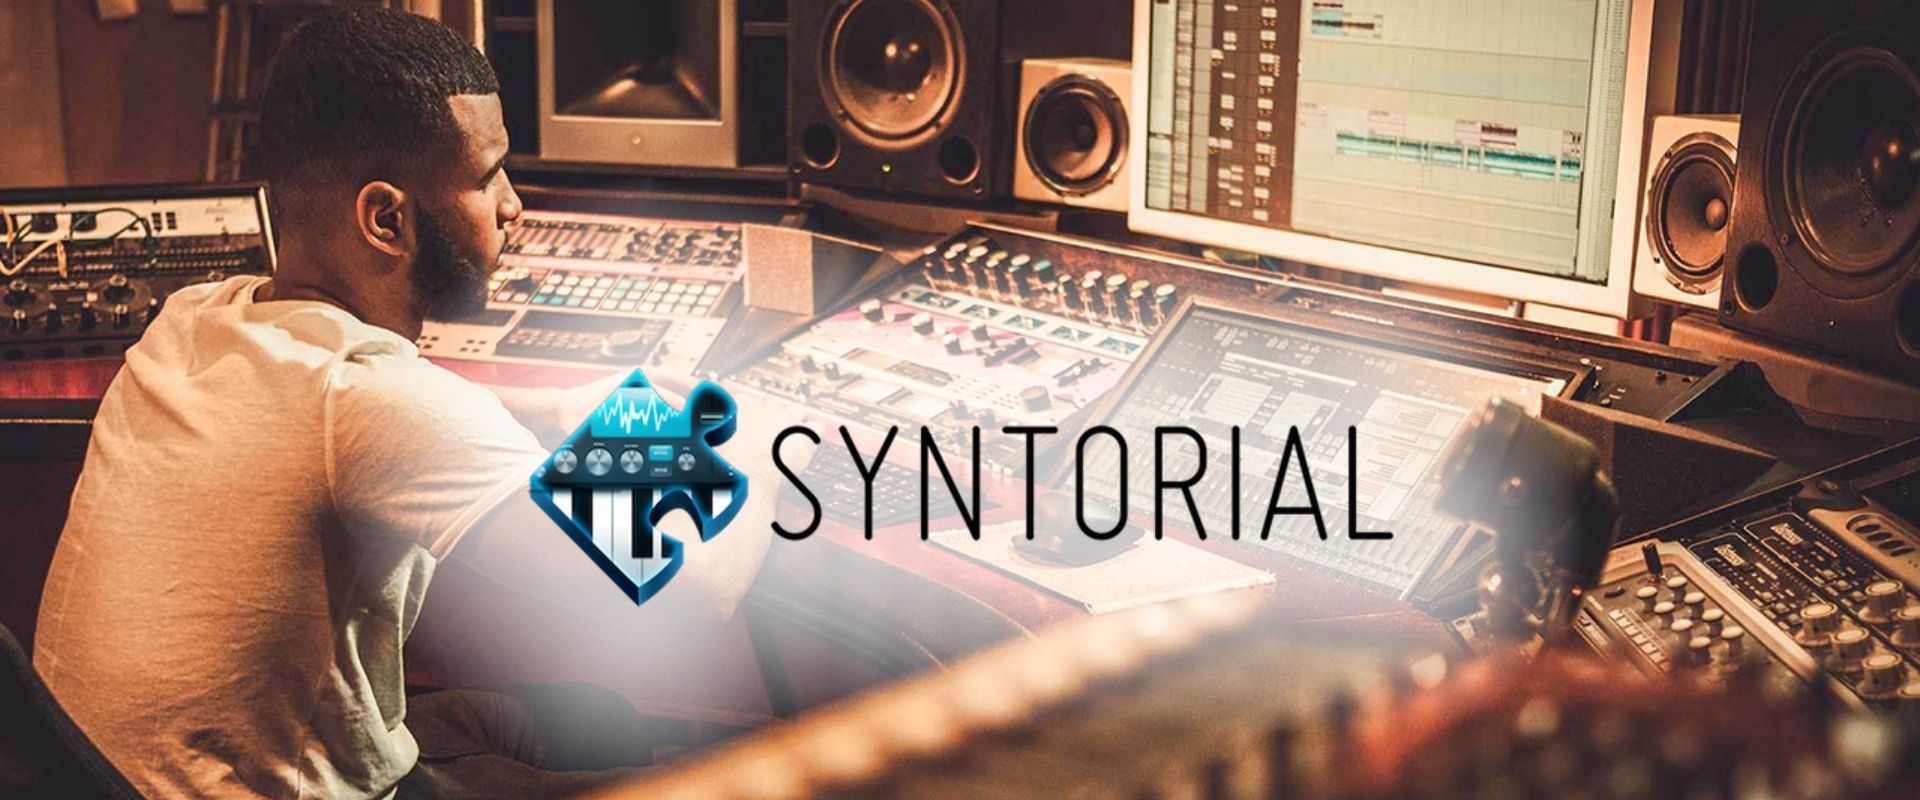 Syntorial software